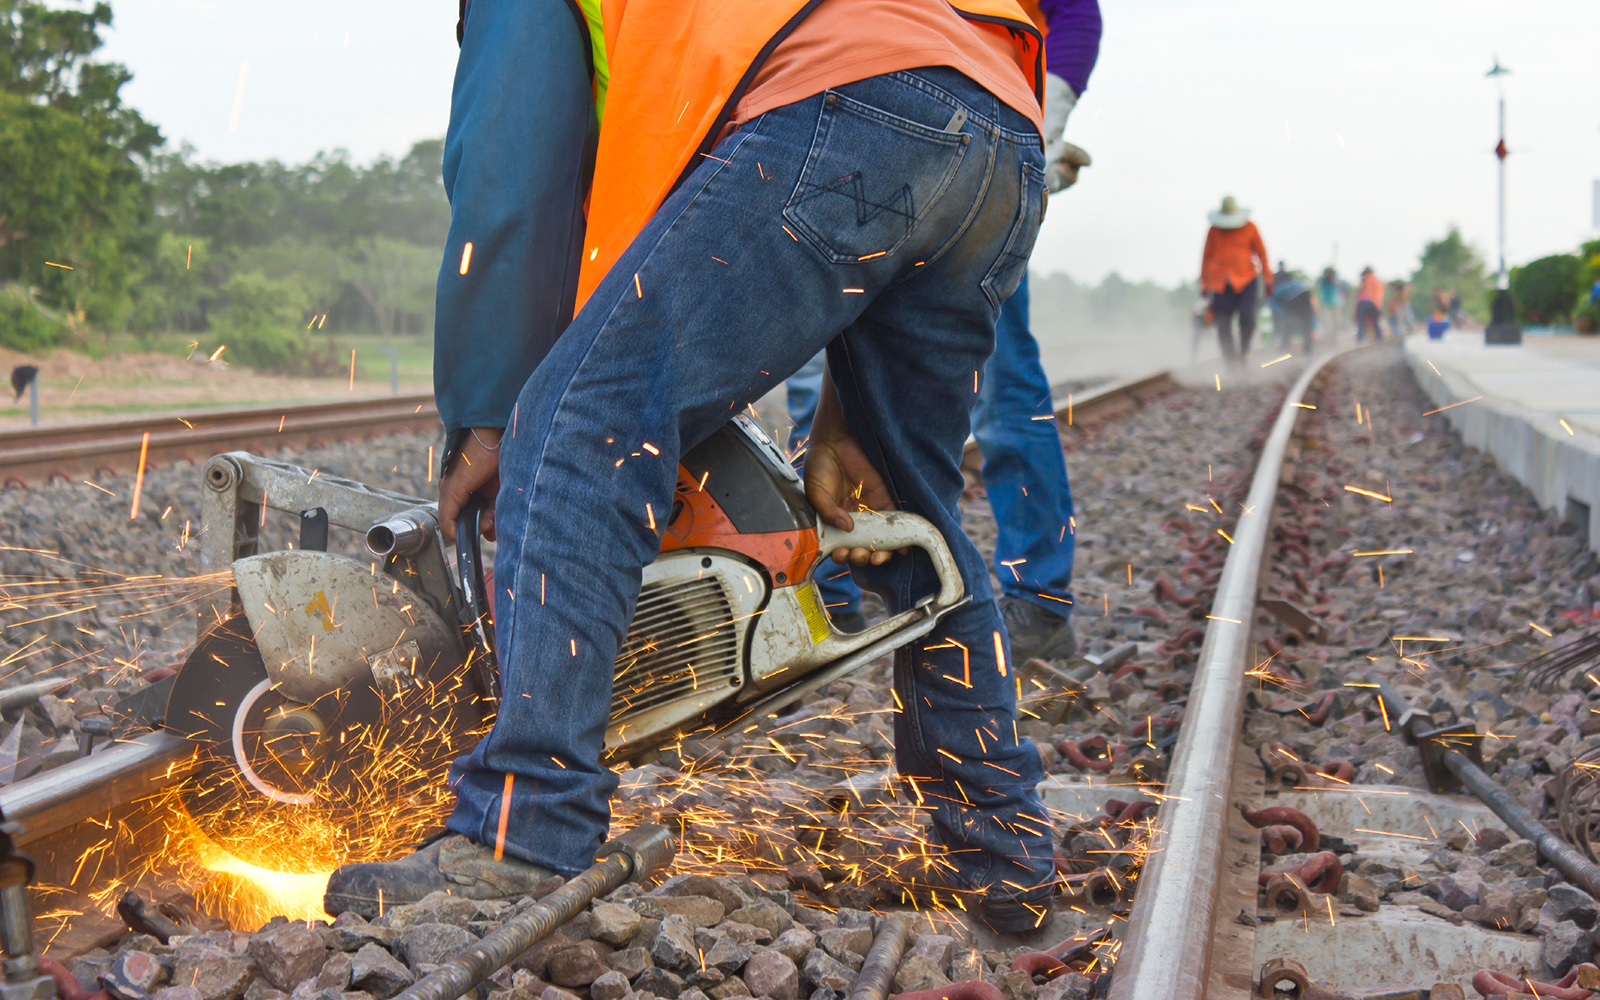 Sparks fly from a circular saw operated by a worker cutting a rail on a railway